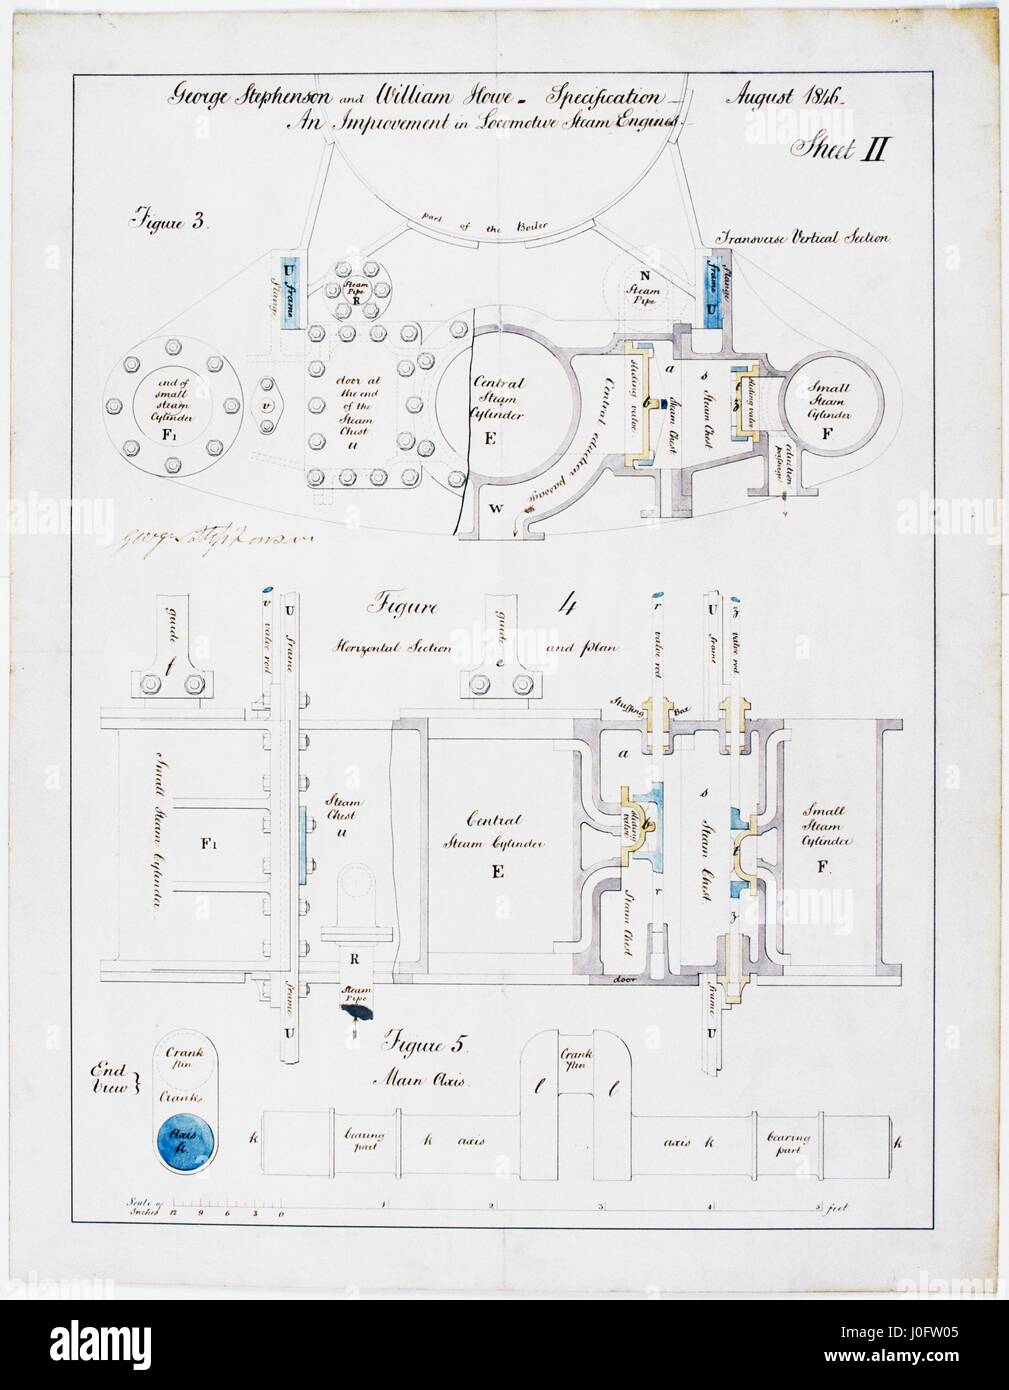 An improvement in locomotive steam engines, specification, August 1846, sheet II, detail drawings Stock Photo